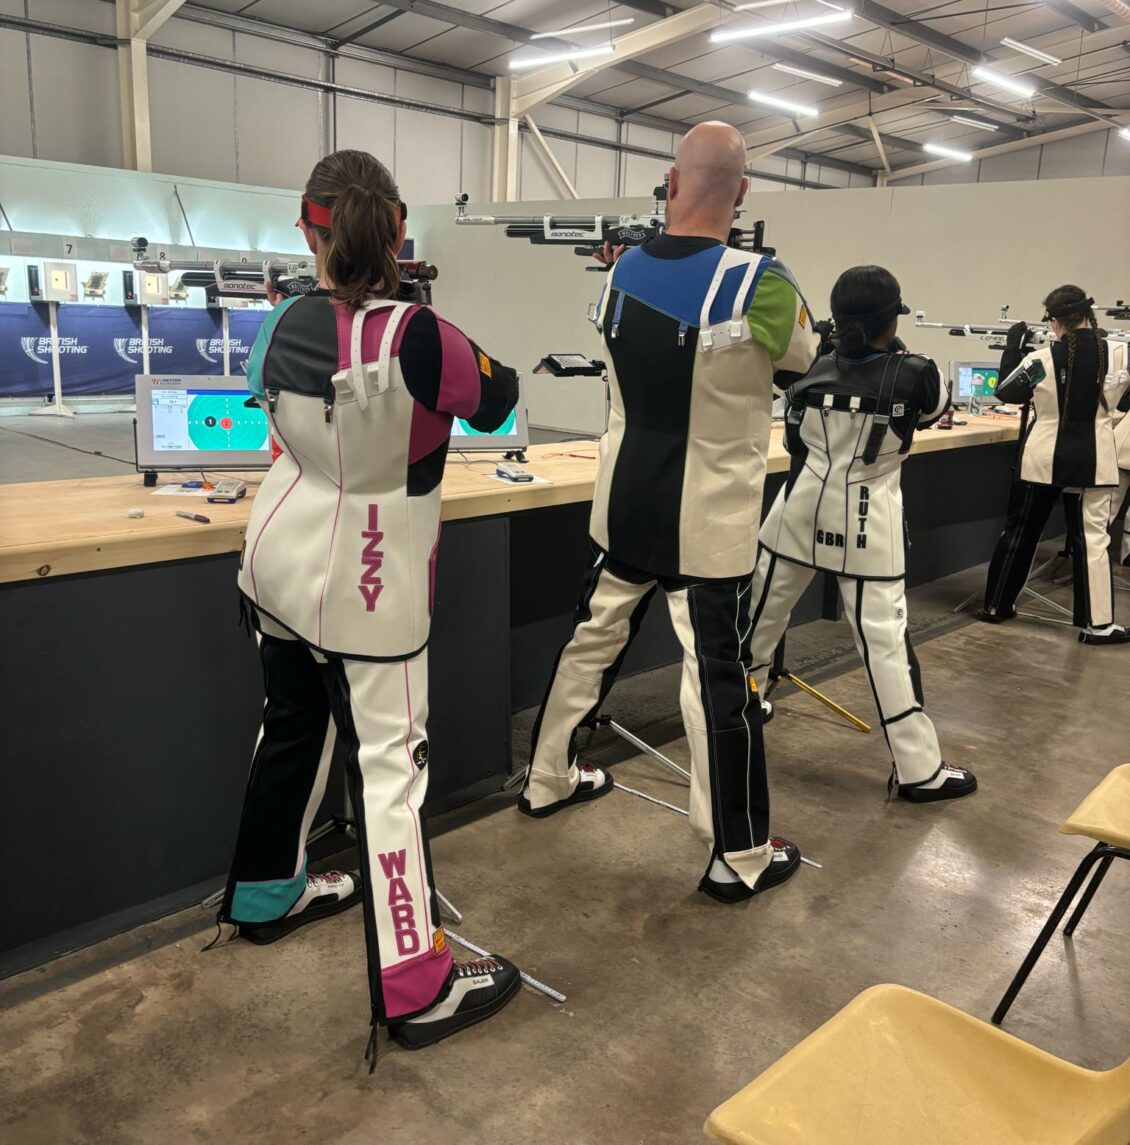 Competitors shoot target air rifles at the British Shooting Air Series competition. Their backs are to the camera and they are wearing special canvas jackets and trousers.